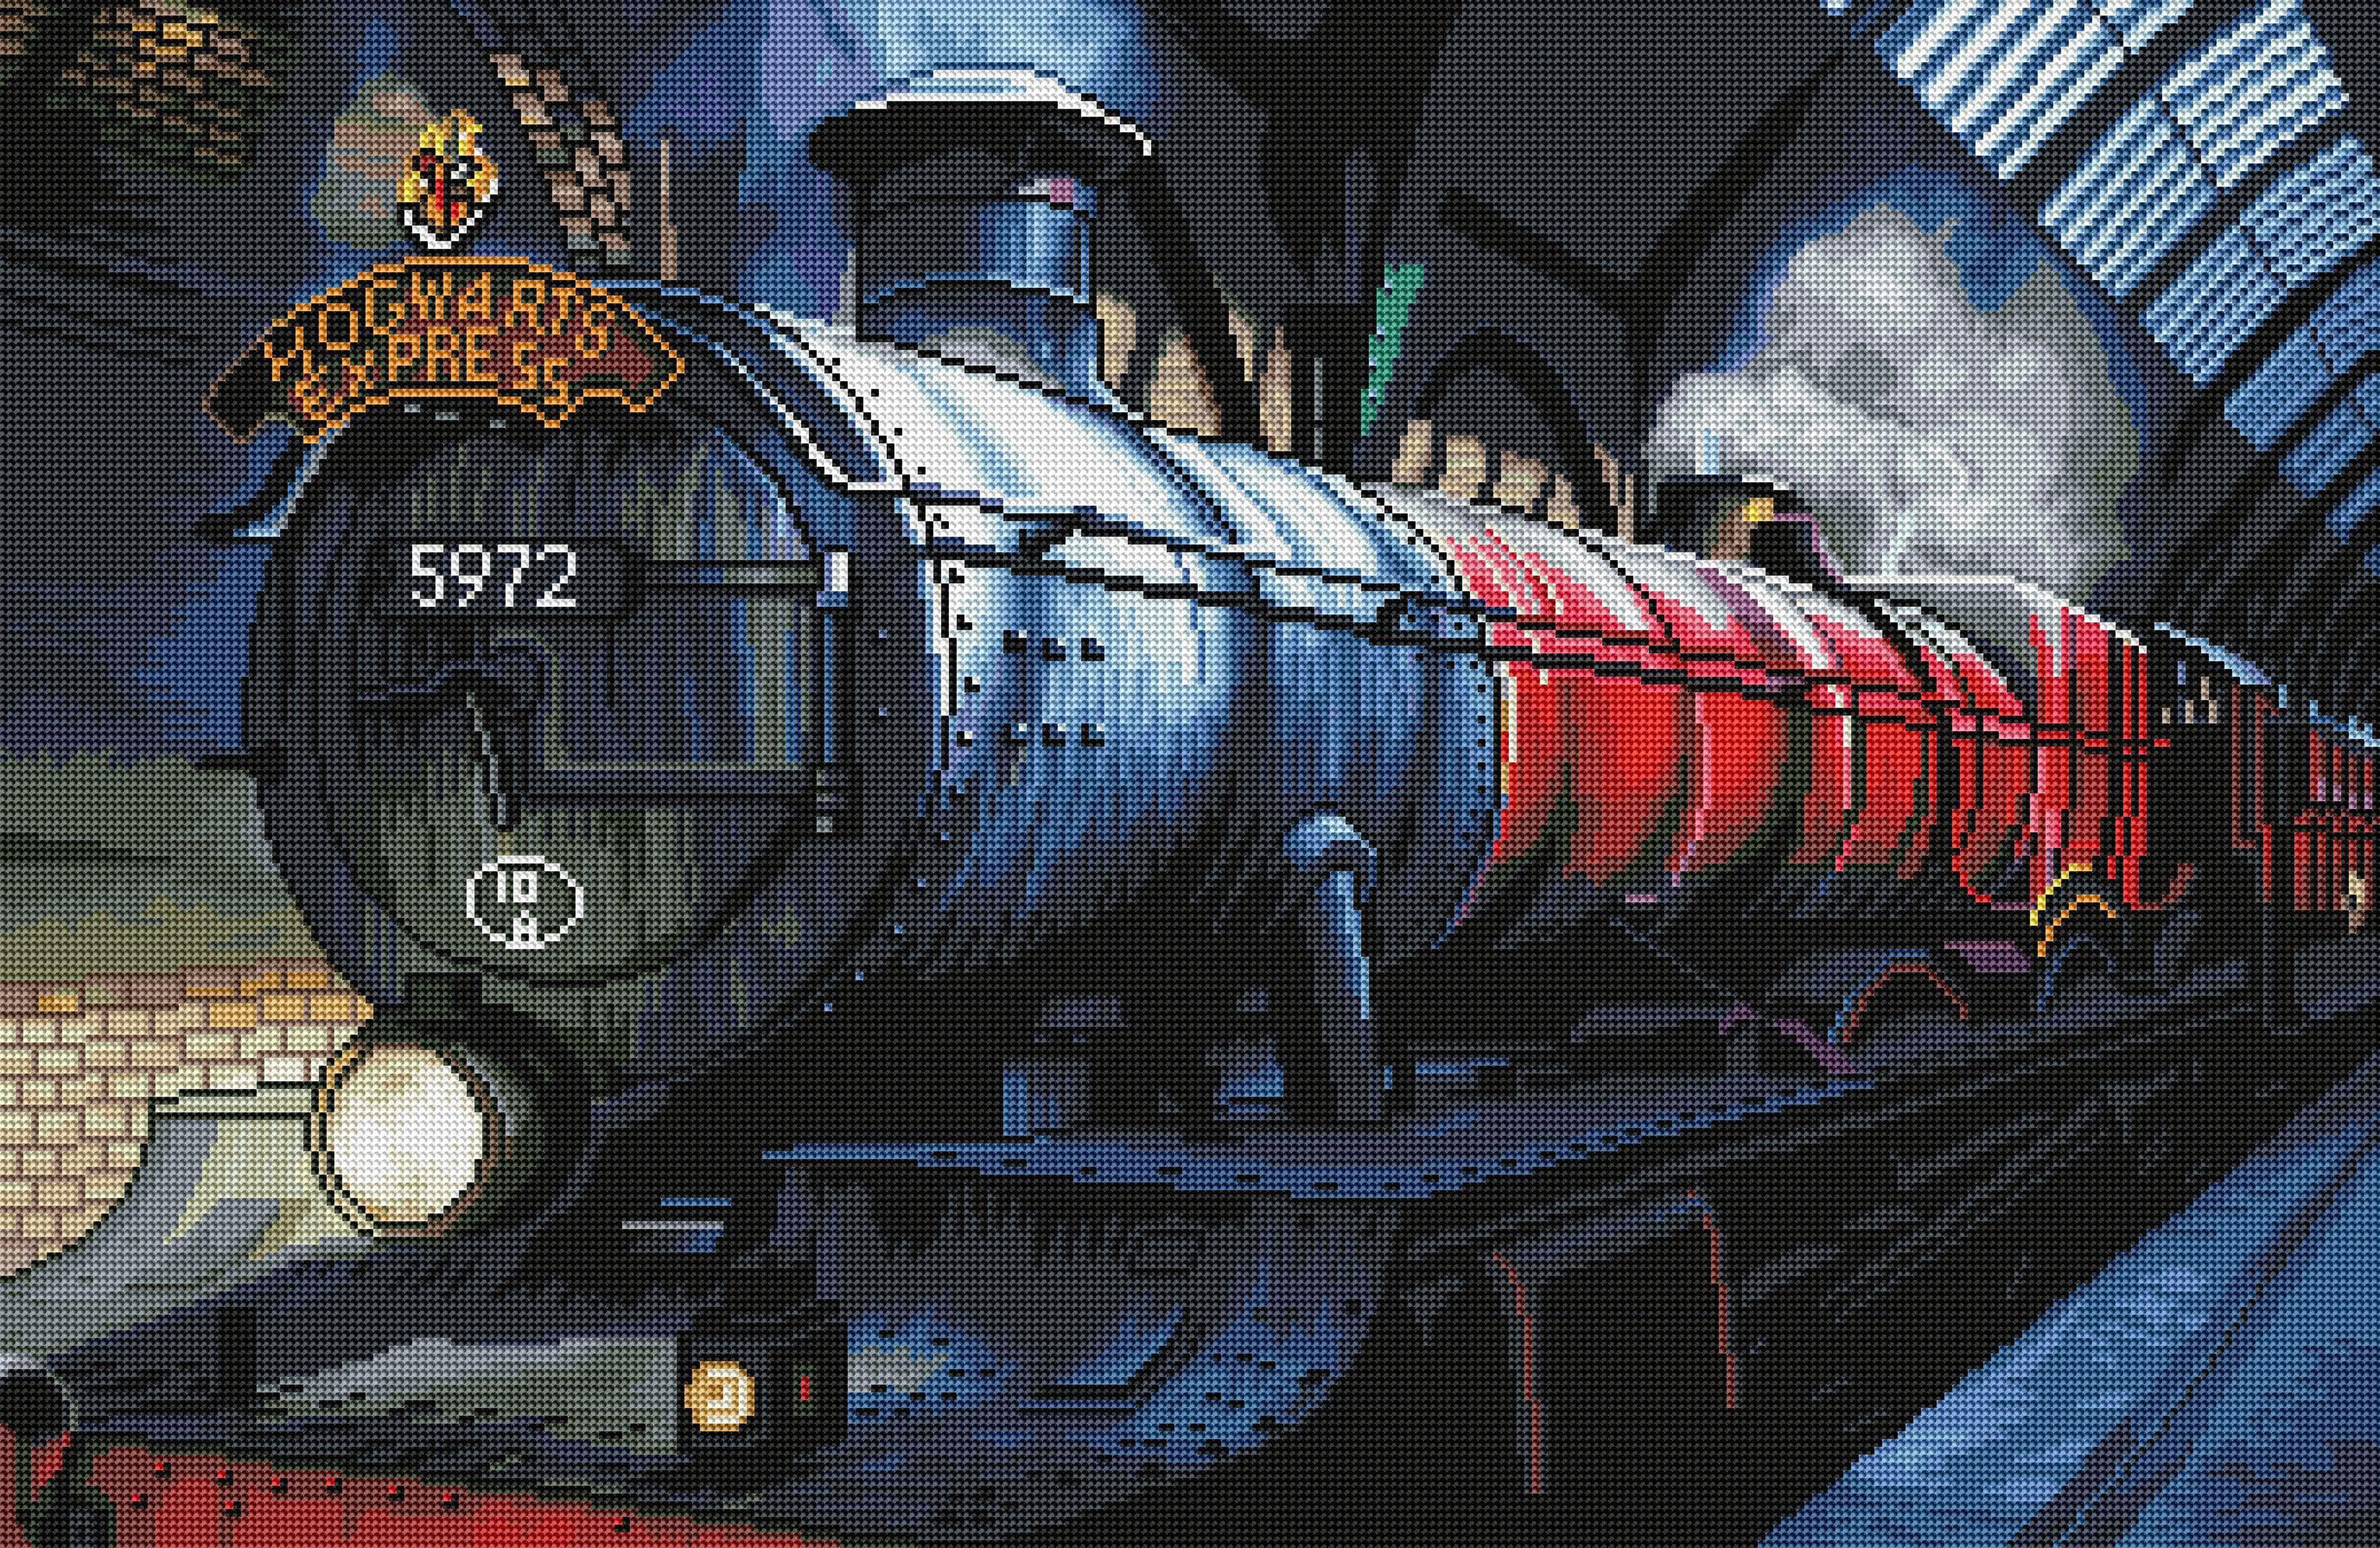 Harry Potter Hogwarts Train Express Paint By Numbers - Paint By Numbers